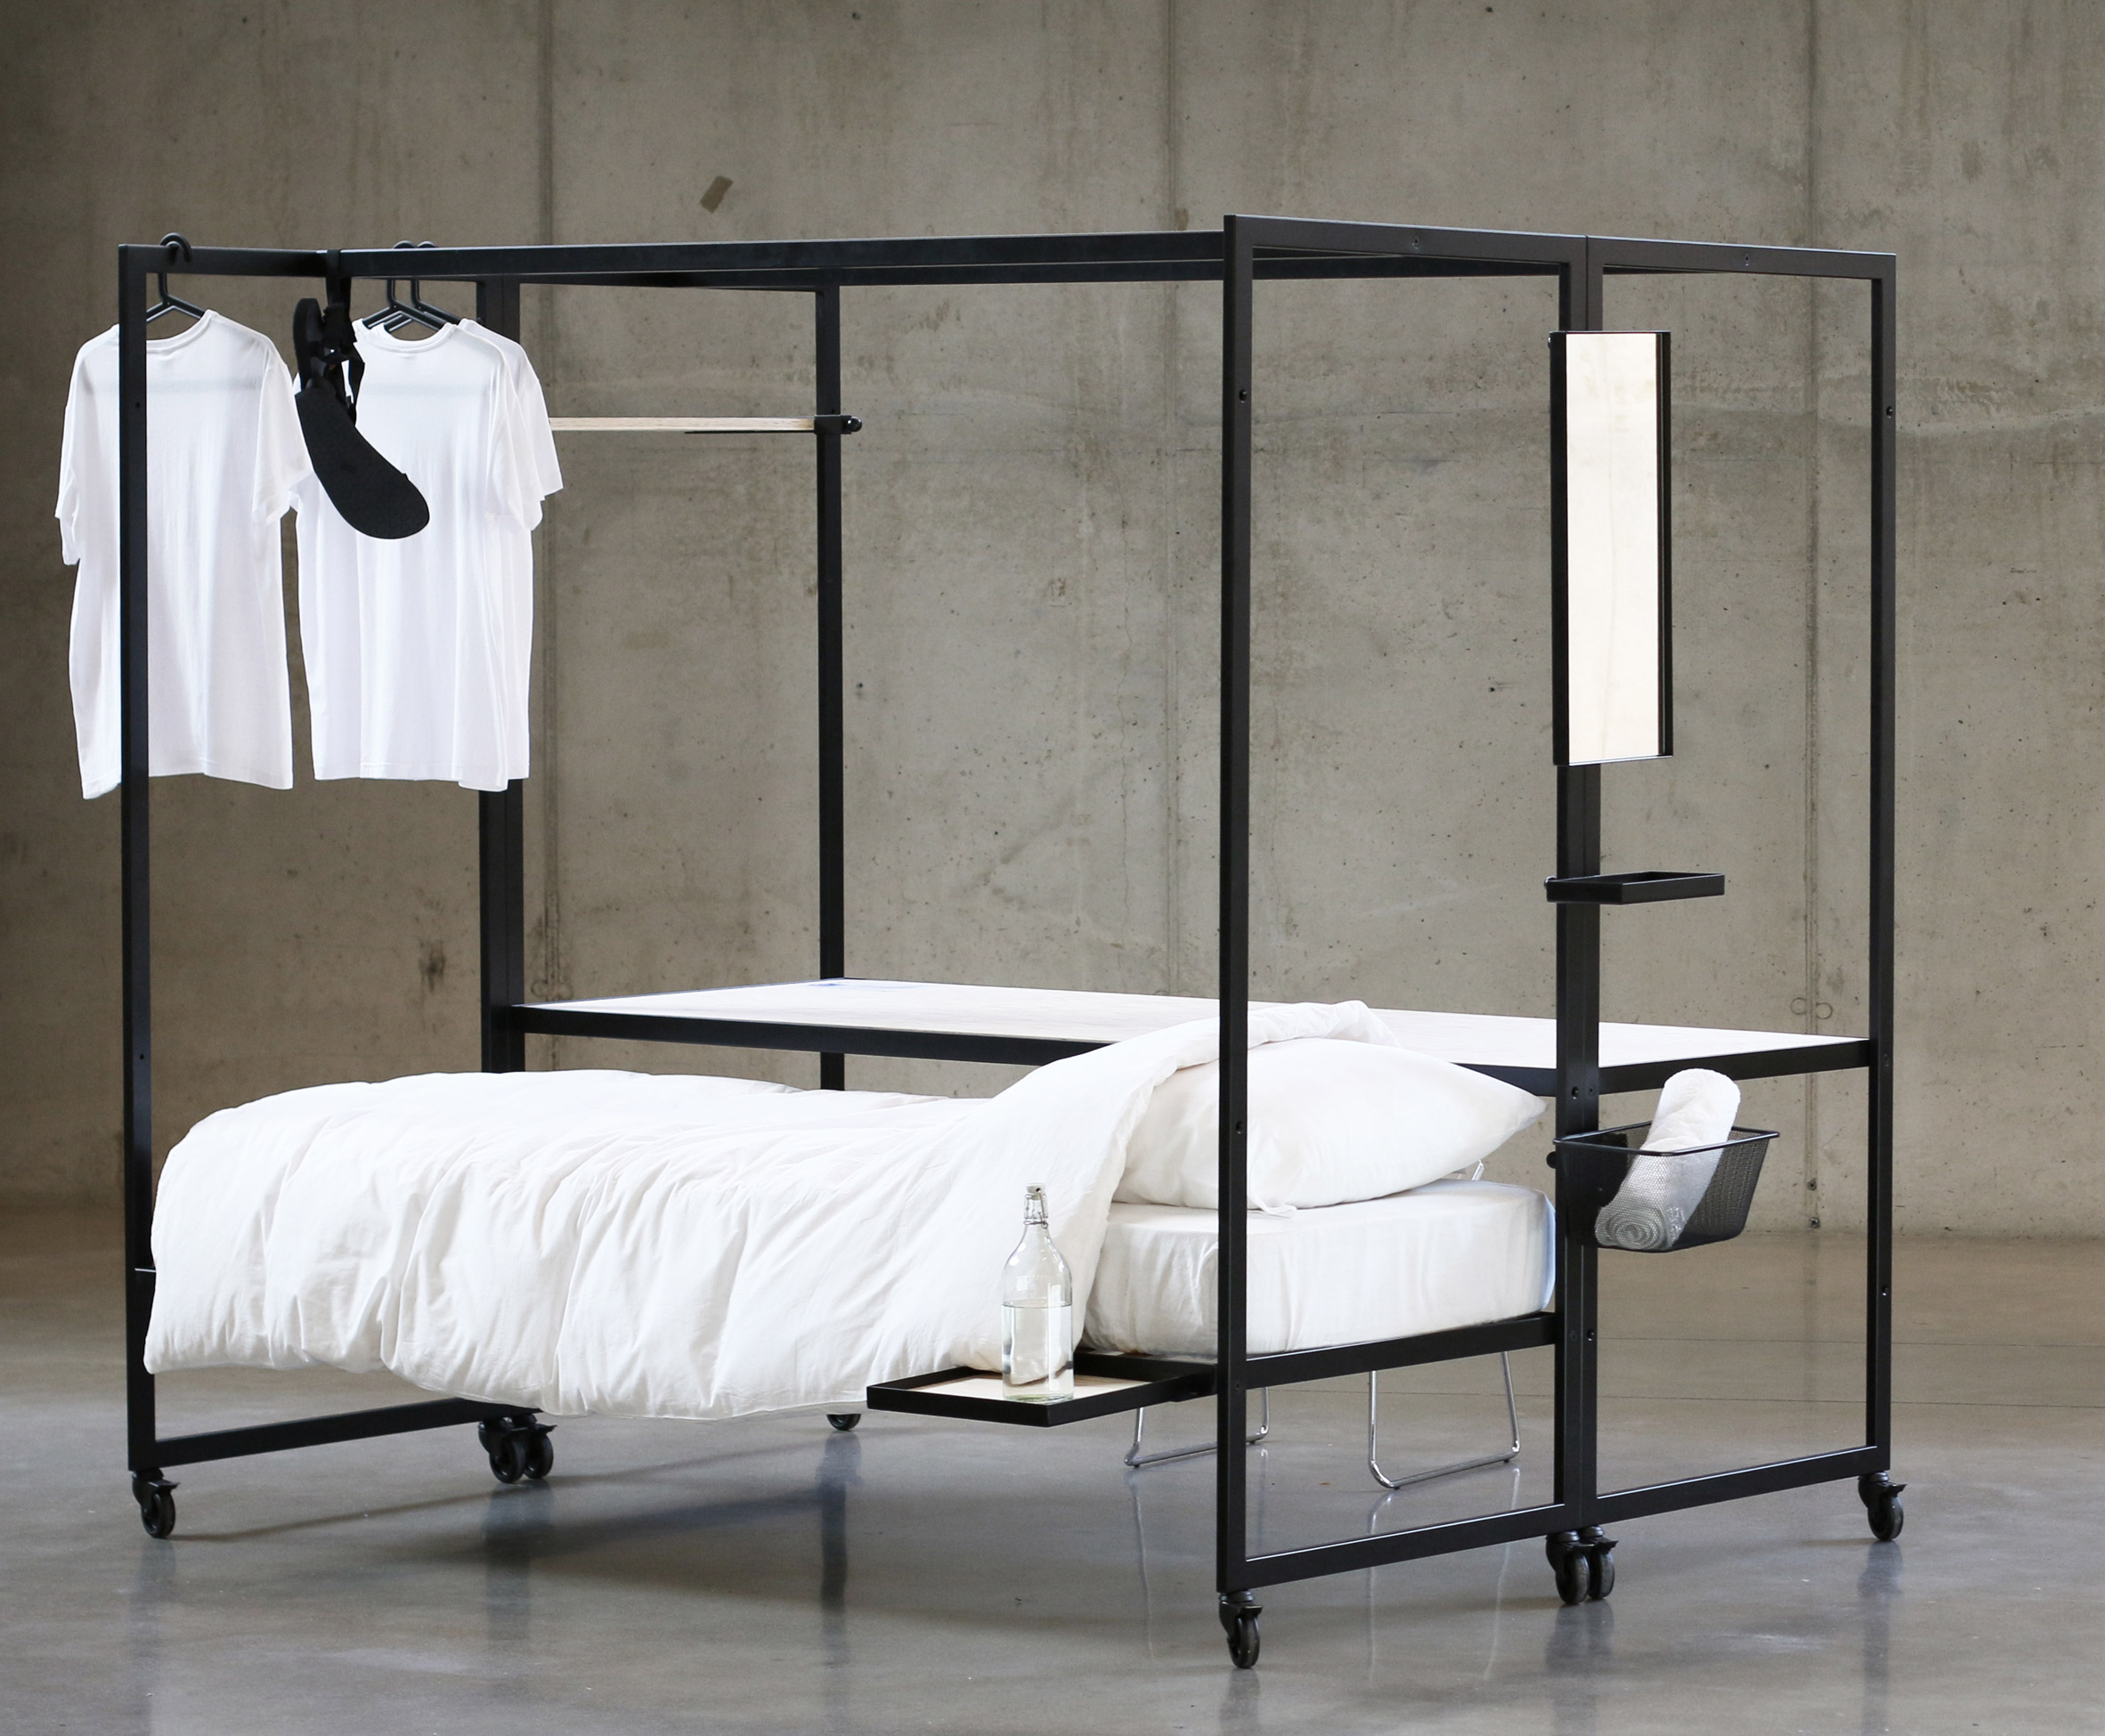 Hybrid bed-desk frame by Pieter Peulen helps students make the most of tiny living spaces